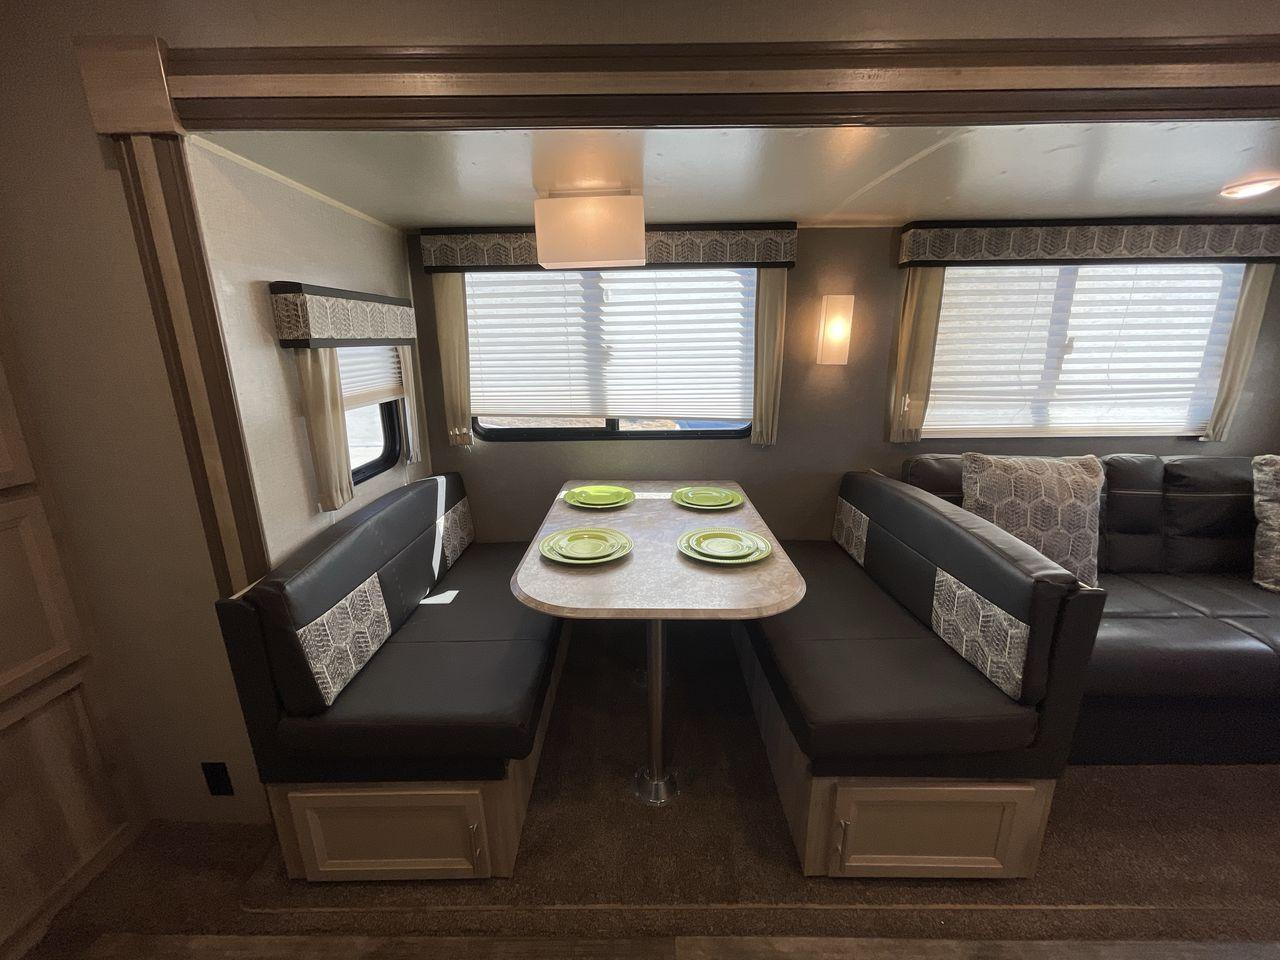 2021 COACHMEN CATALINA 243RBS (5ZT2CANBXMU) , Length: 28.75 ft. | Dry Weight: 5,692 lbs. | Gross Weight: 7,600 lbs. | Slides: 1 transmission, located at 4319 N Main Street, Cleburne, TX, 76033, (817) 221-0660, 32.435829, -97.384178 - The 2021 Forest River Catalina 243RBS travel trailer offers a spacious floorplan that is truly comfortable and convenient. As you enter the trailer, you will find a cozy front bedroom with a lovely queen bed where you can relax and rejuvenate yourself after enjoying the great outdoors. You also have - Photo #14